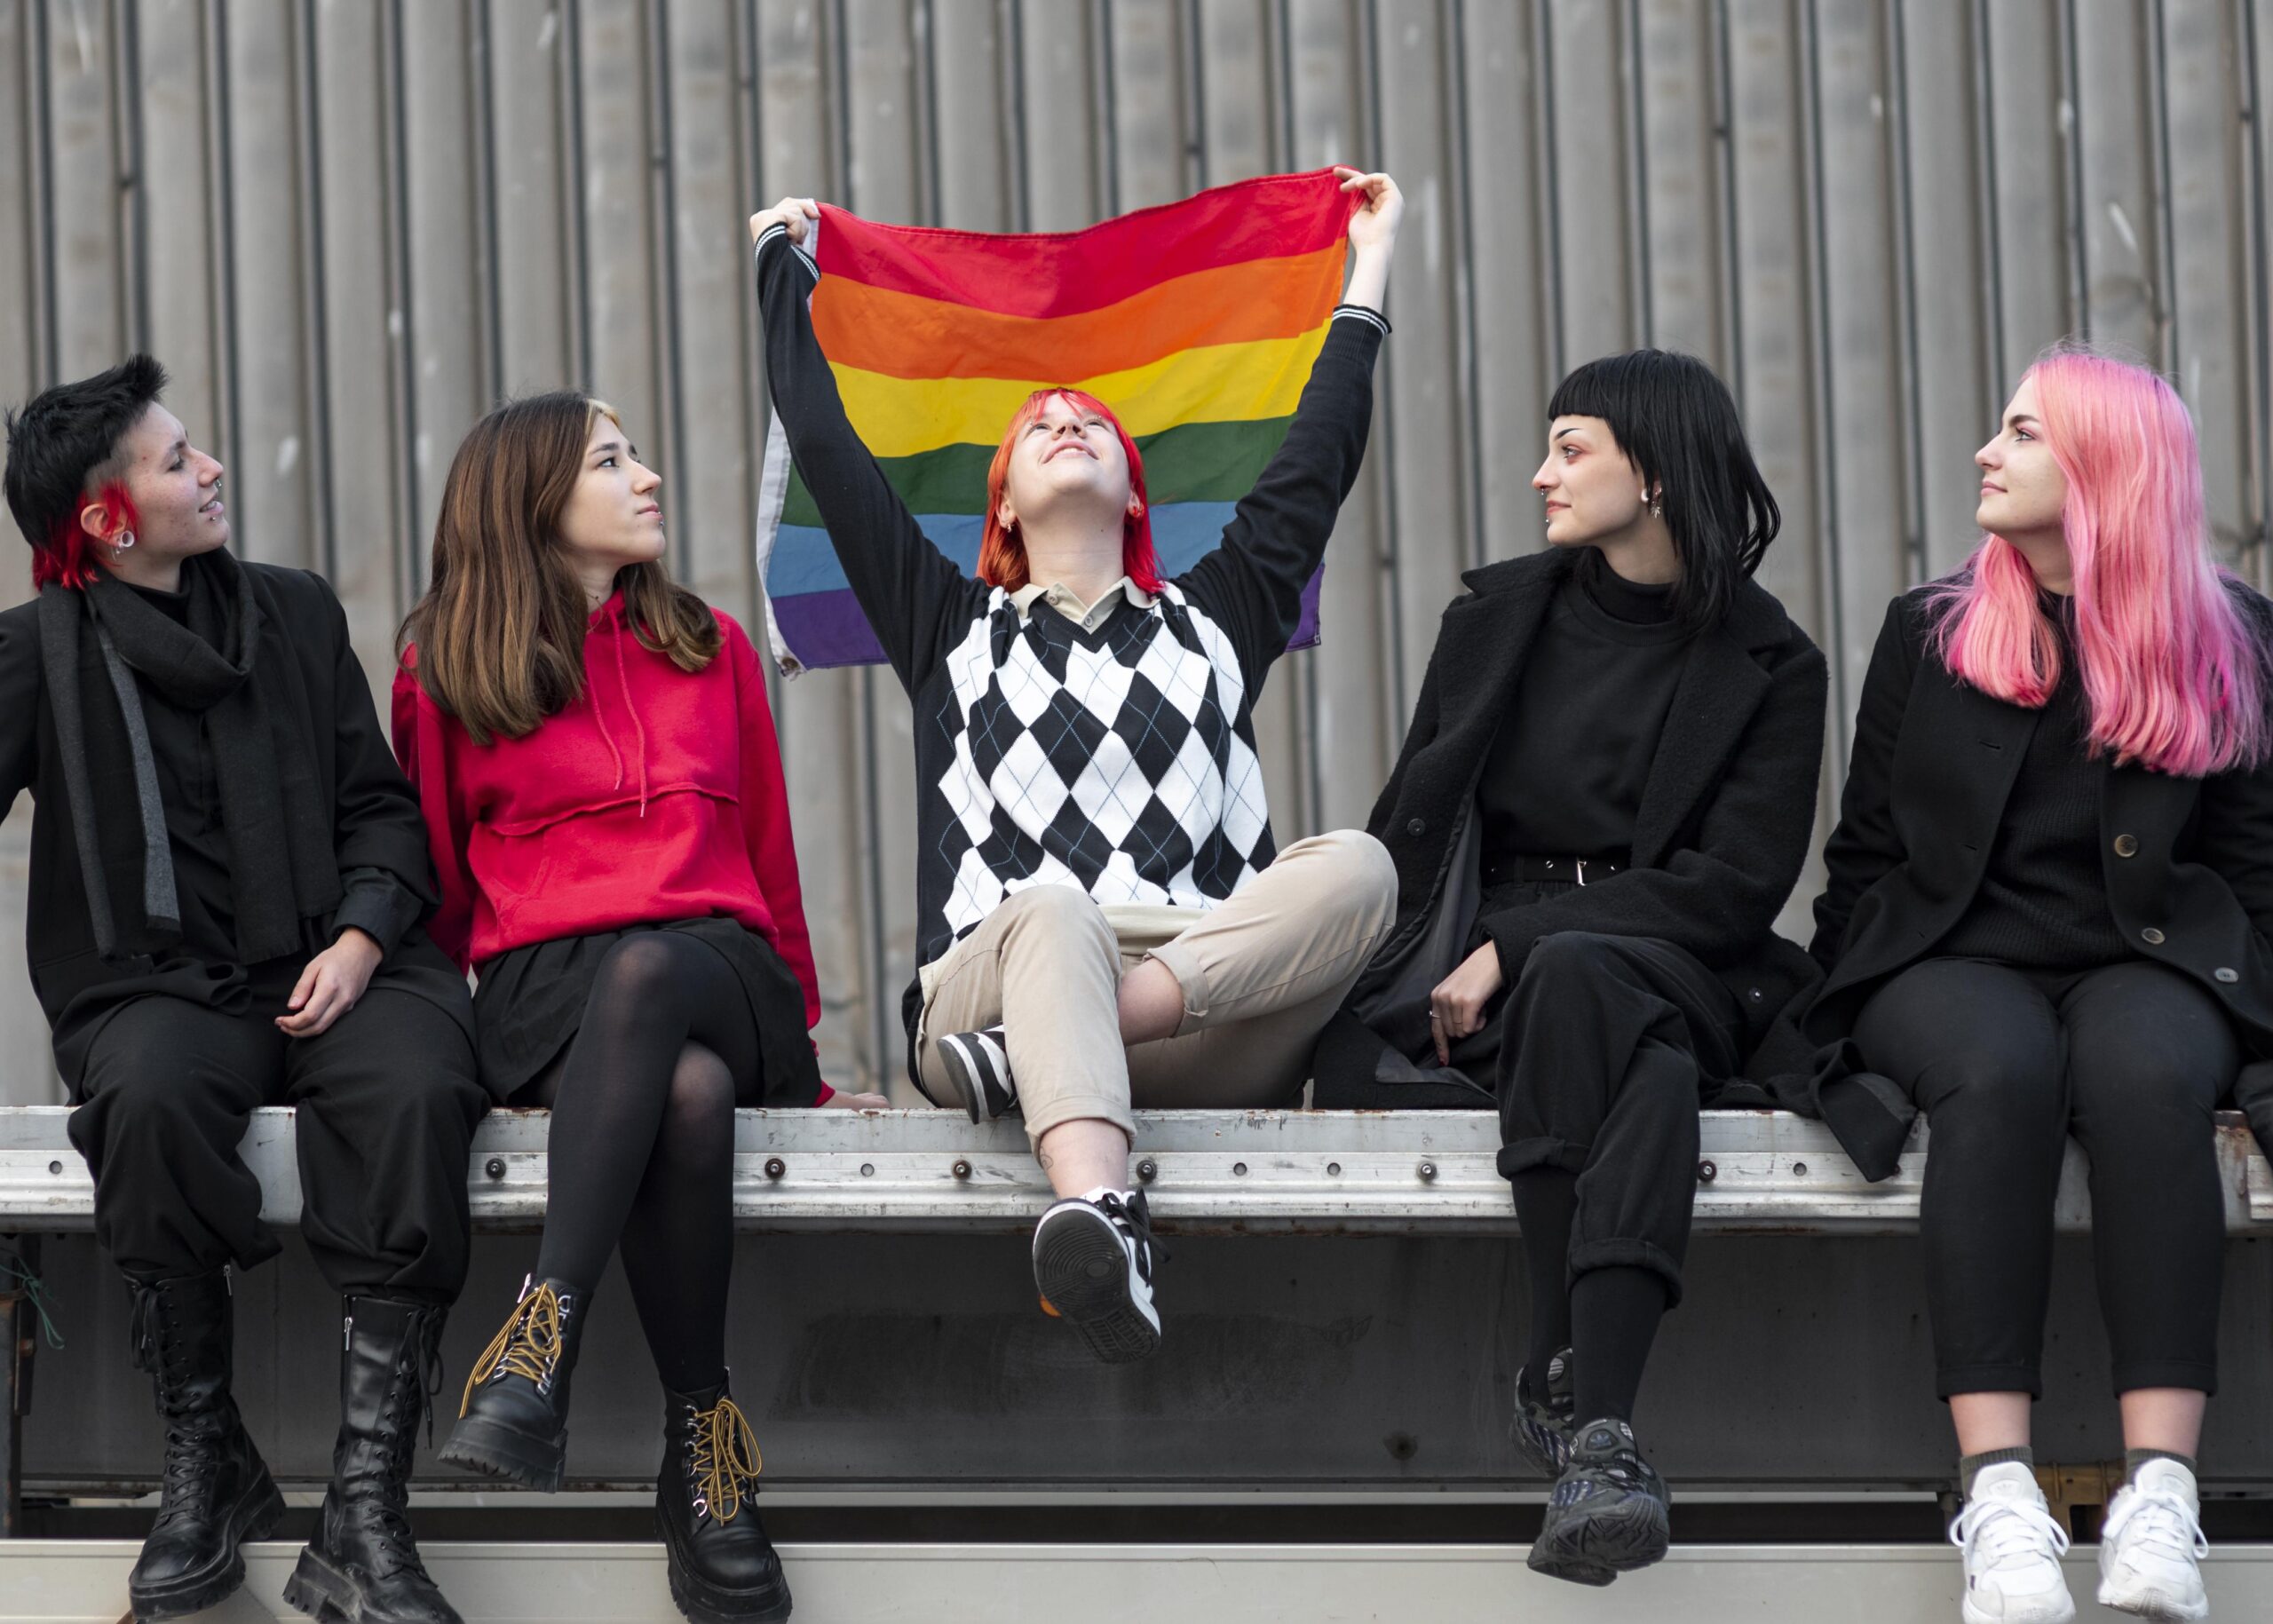 Gen z’s views on LGBTQ+ rights and acceptance